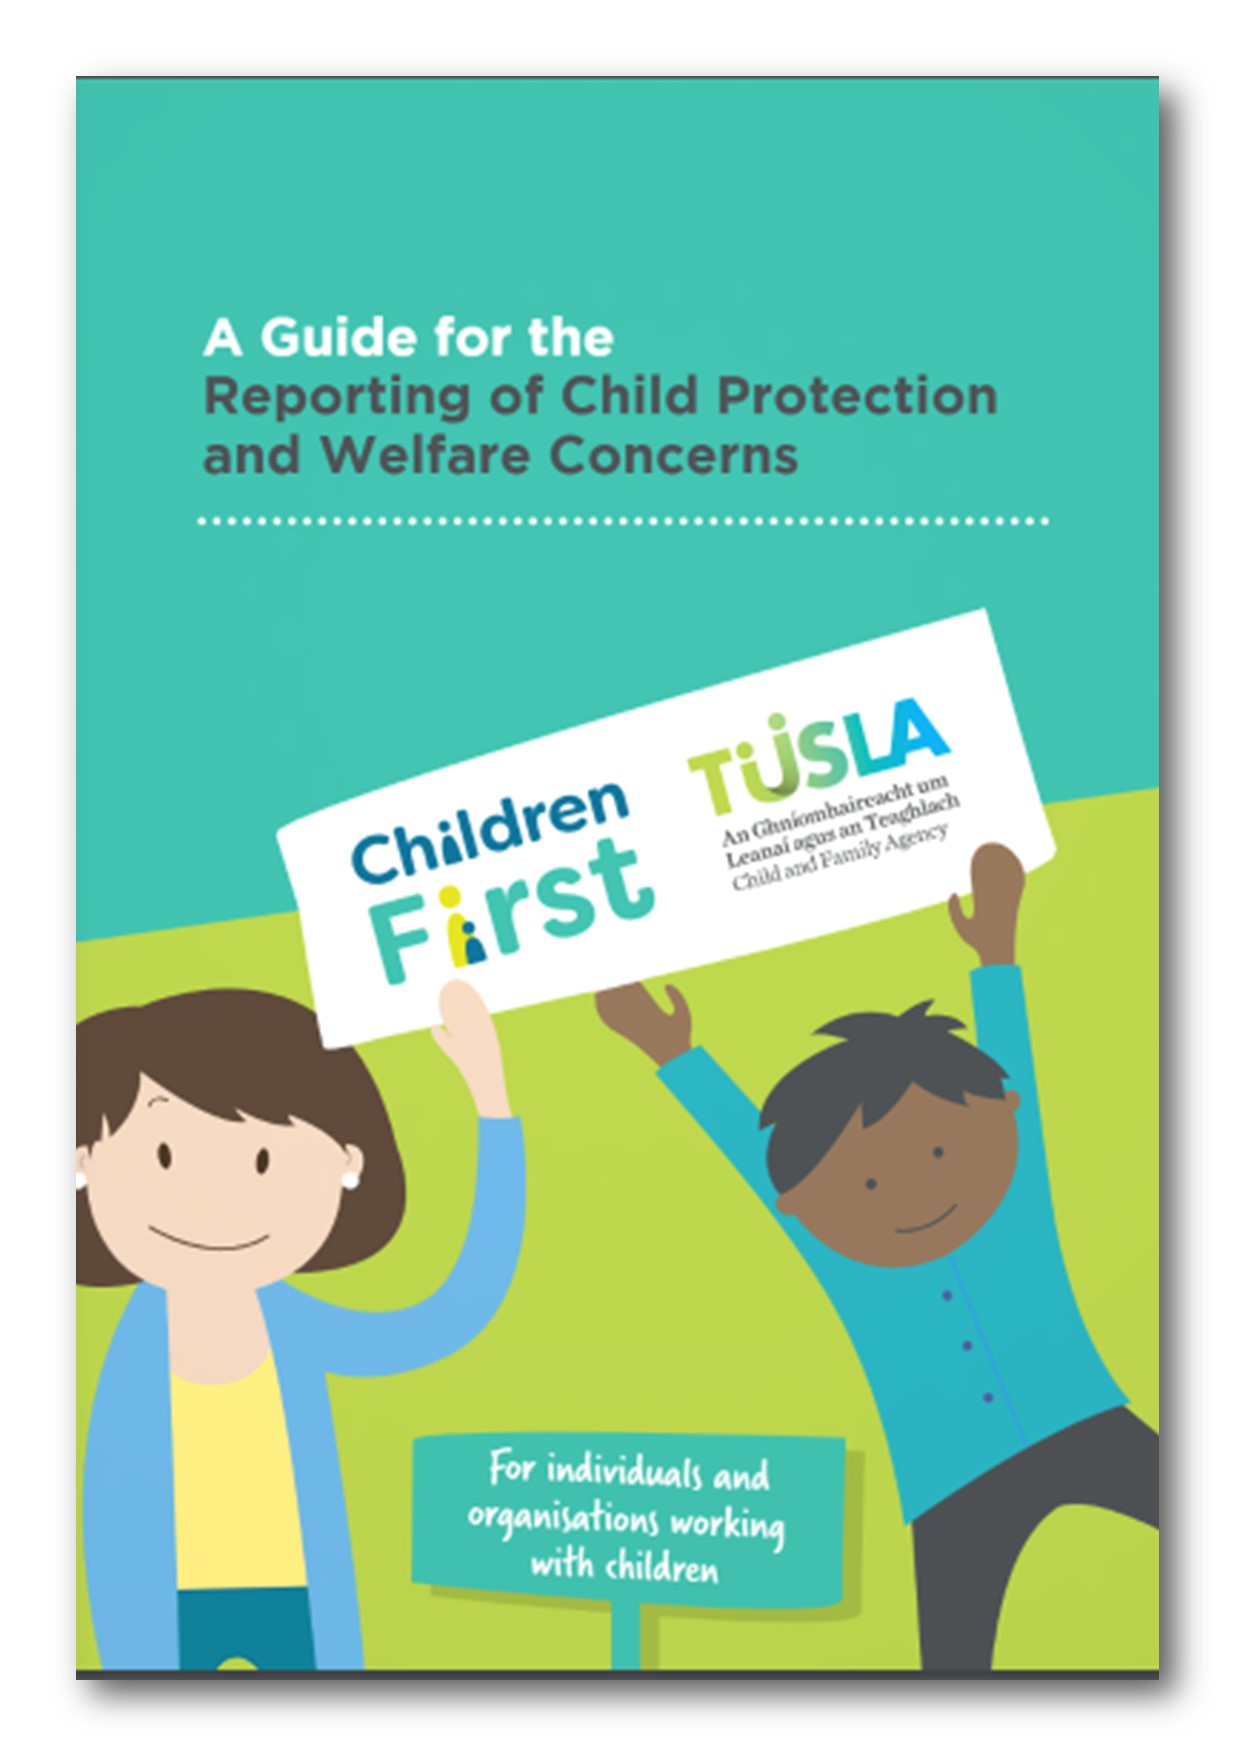 A guide for the reporting of child welfare concerns